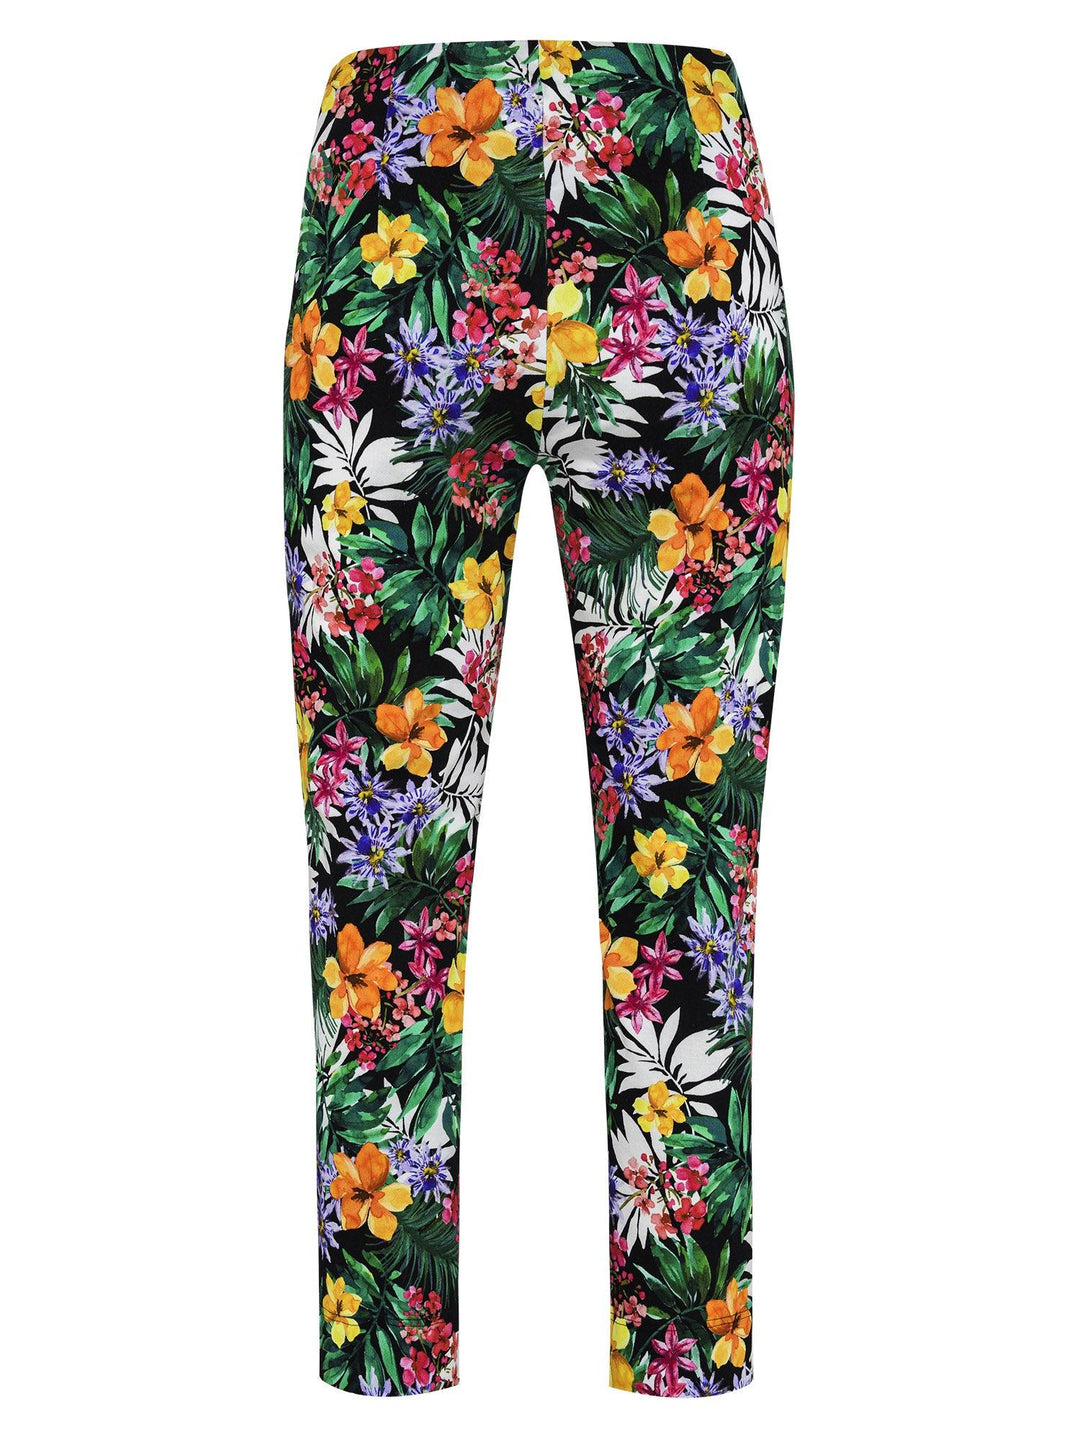 Robell Rose 09 – 7/8 Tropical Print Cropped Jean 51630-54858-90 - Trouser Print, Trouser ginasmartboutique